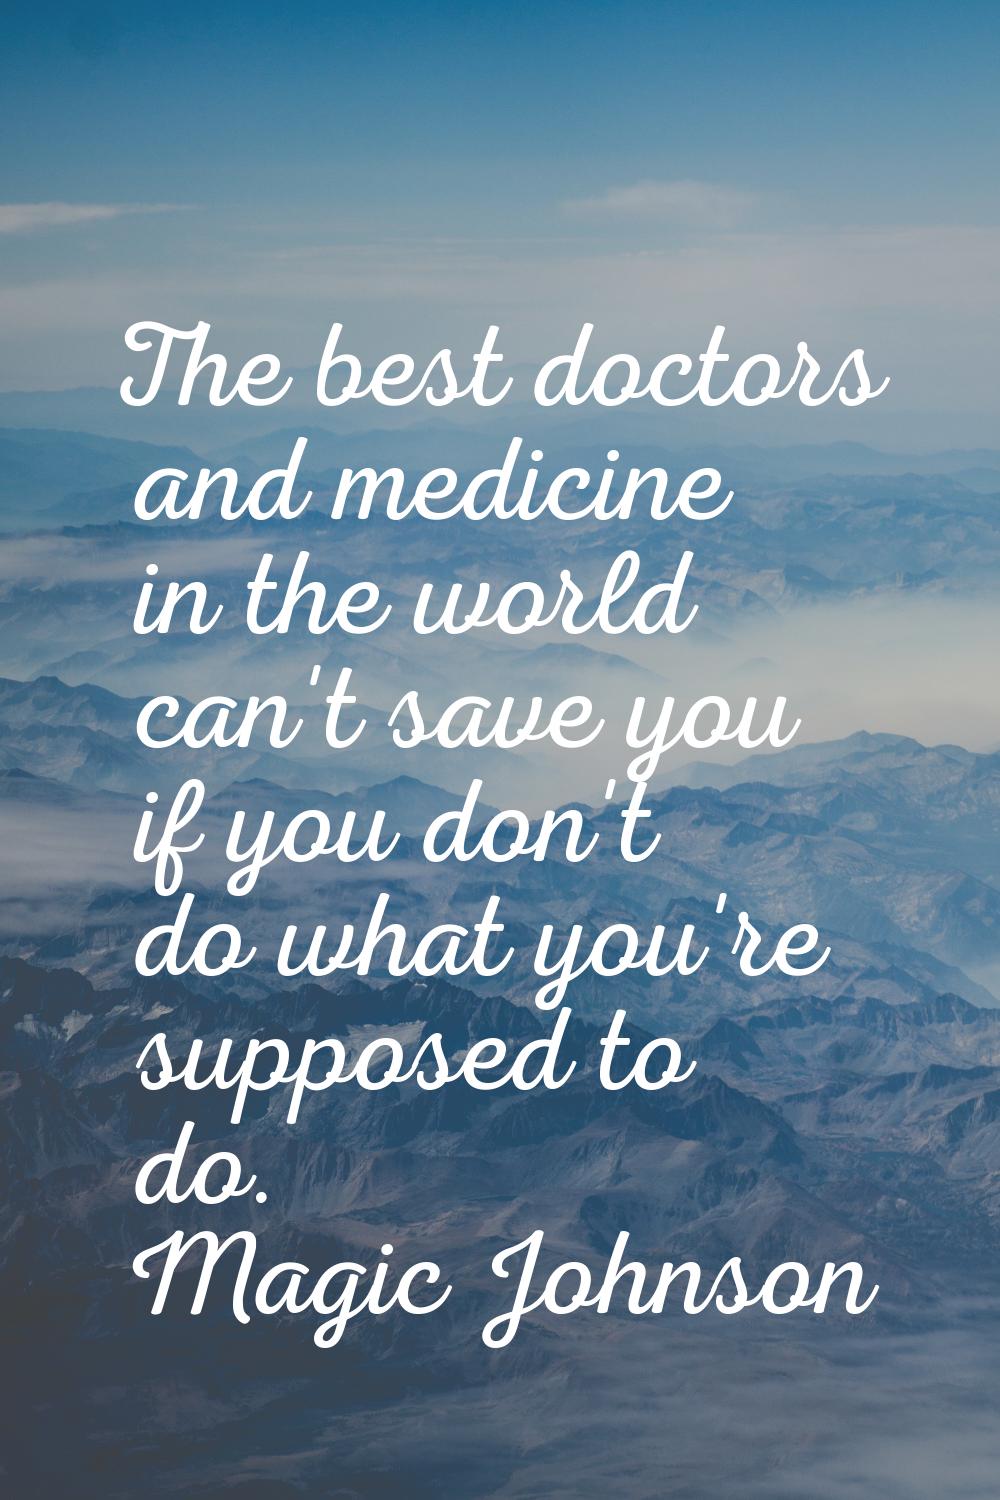 The best doctors and medicine in the world can't save you if you don't do what you're supposed to d